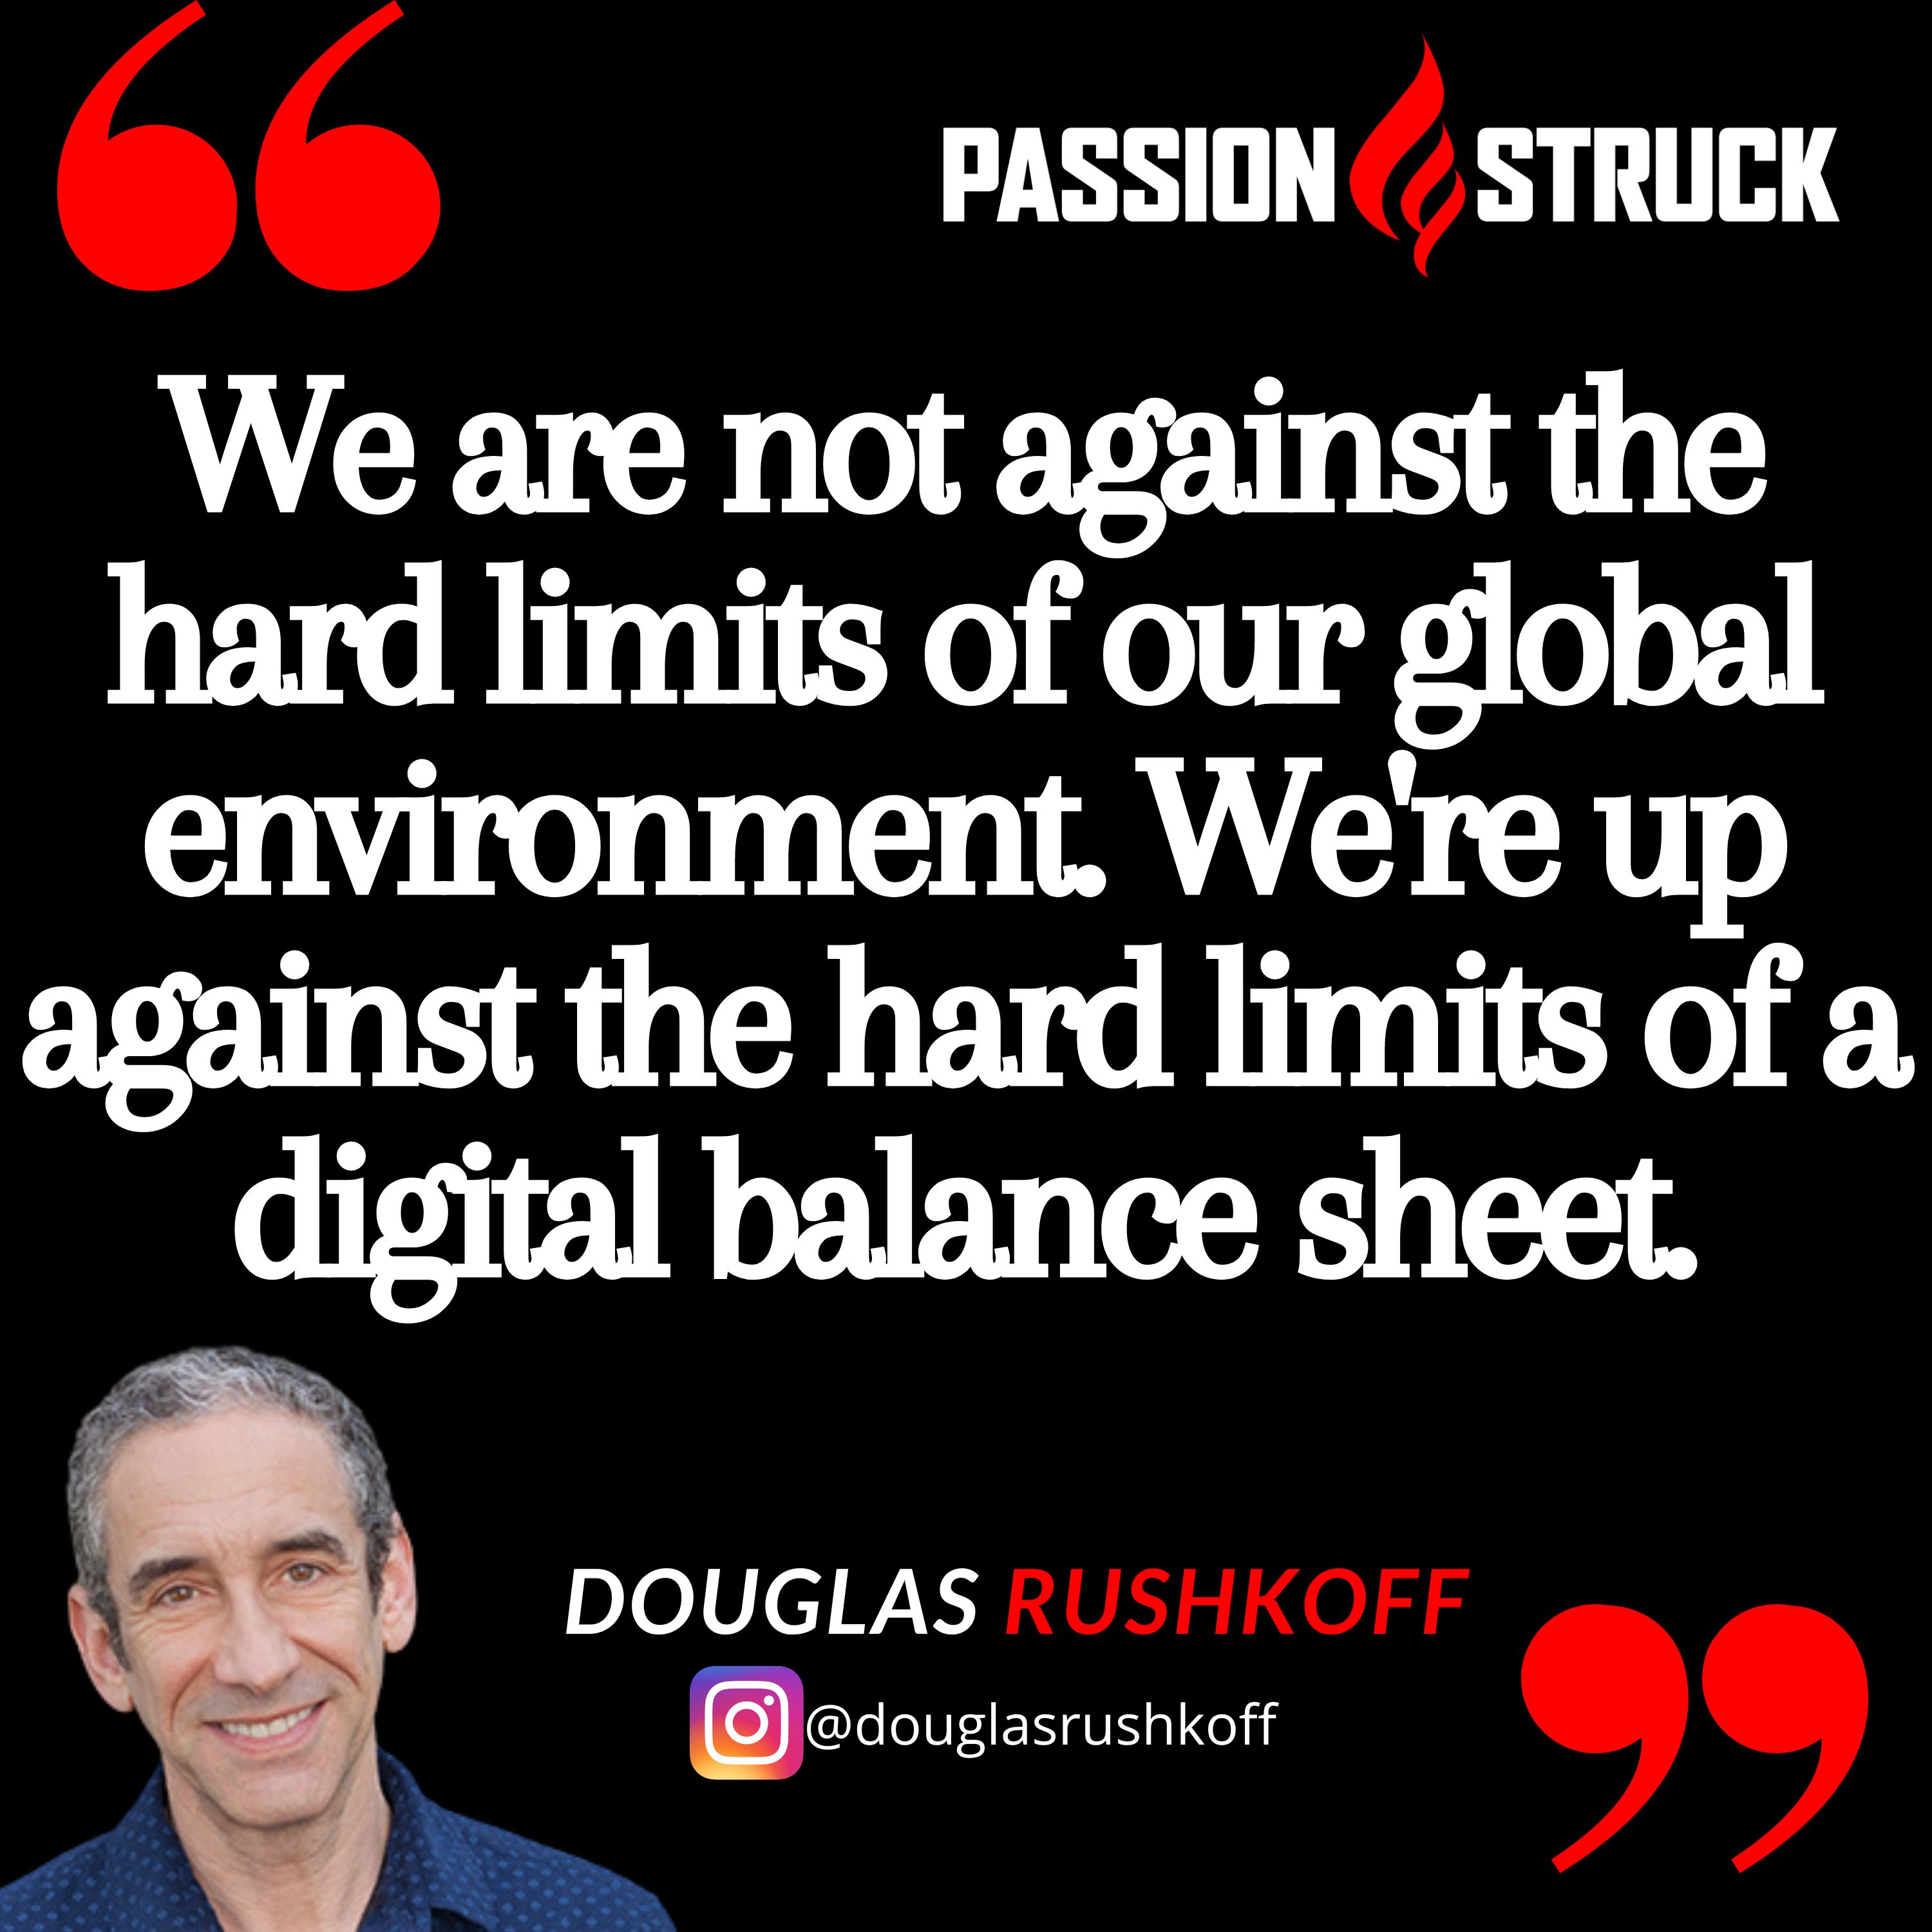 Quote by Douglas Rushkoff from the Passion Struck podcast: We are not against the hard limits of our global environment. We're up against the hard limits of a digital balance sheet.